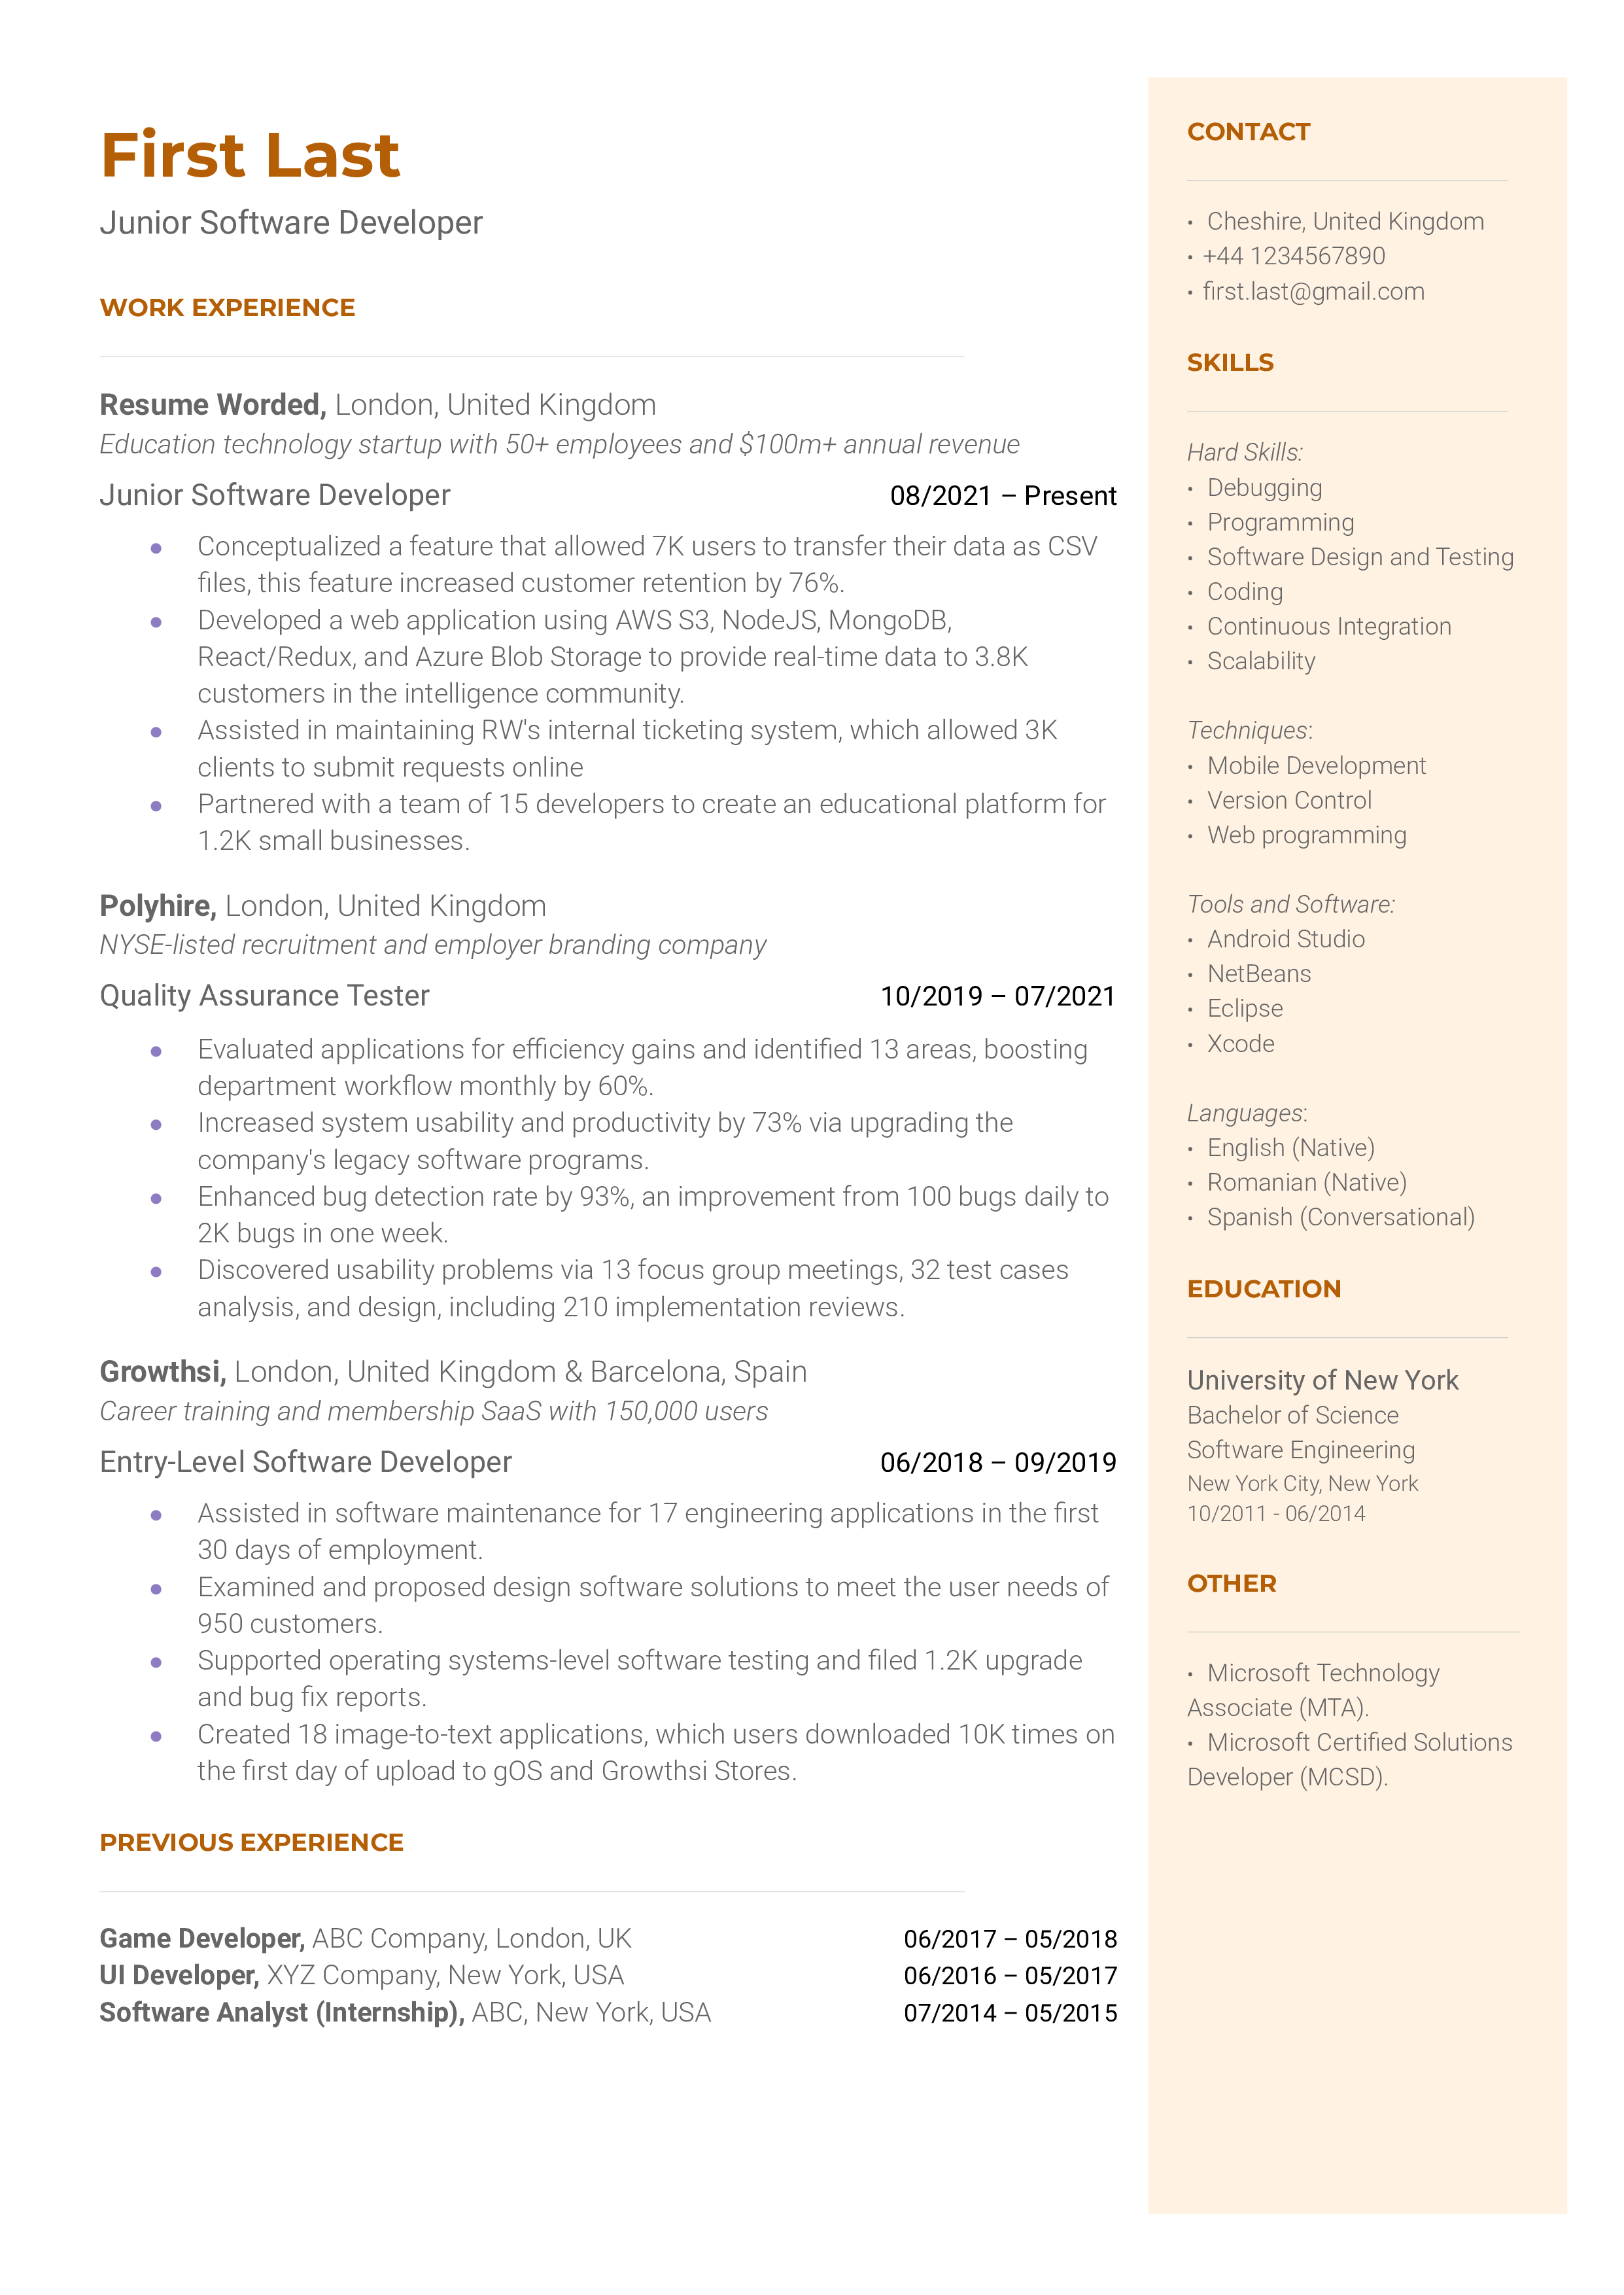 A junior software developer resume template that uses metrics to illustrate achievements